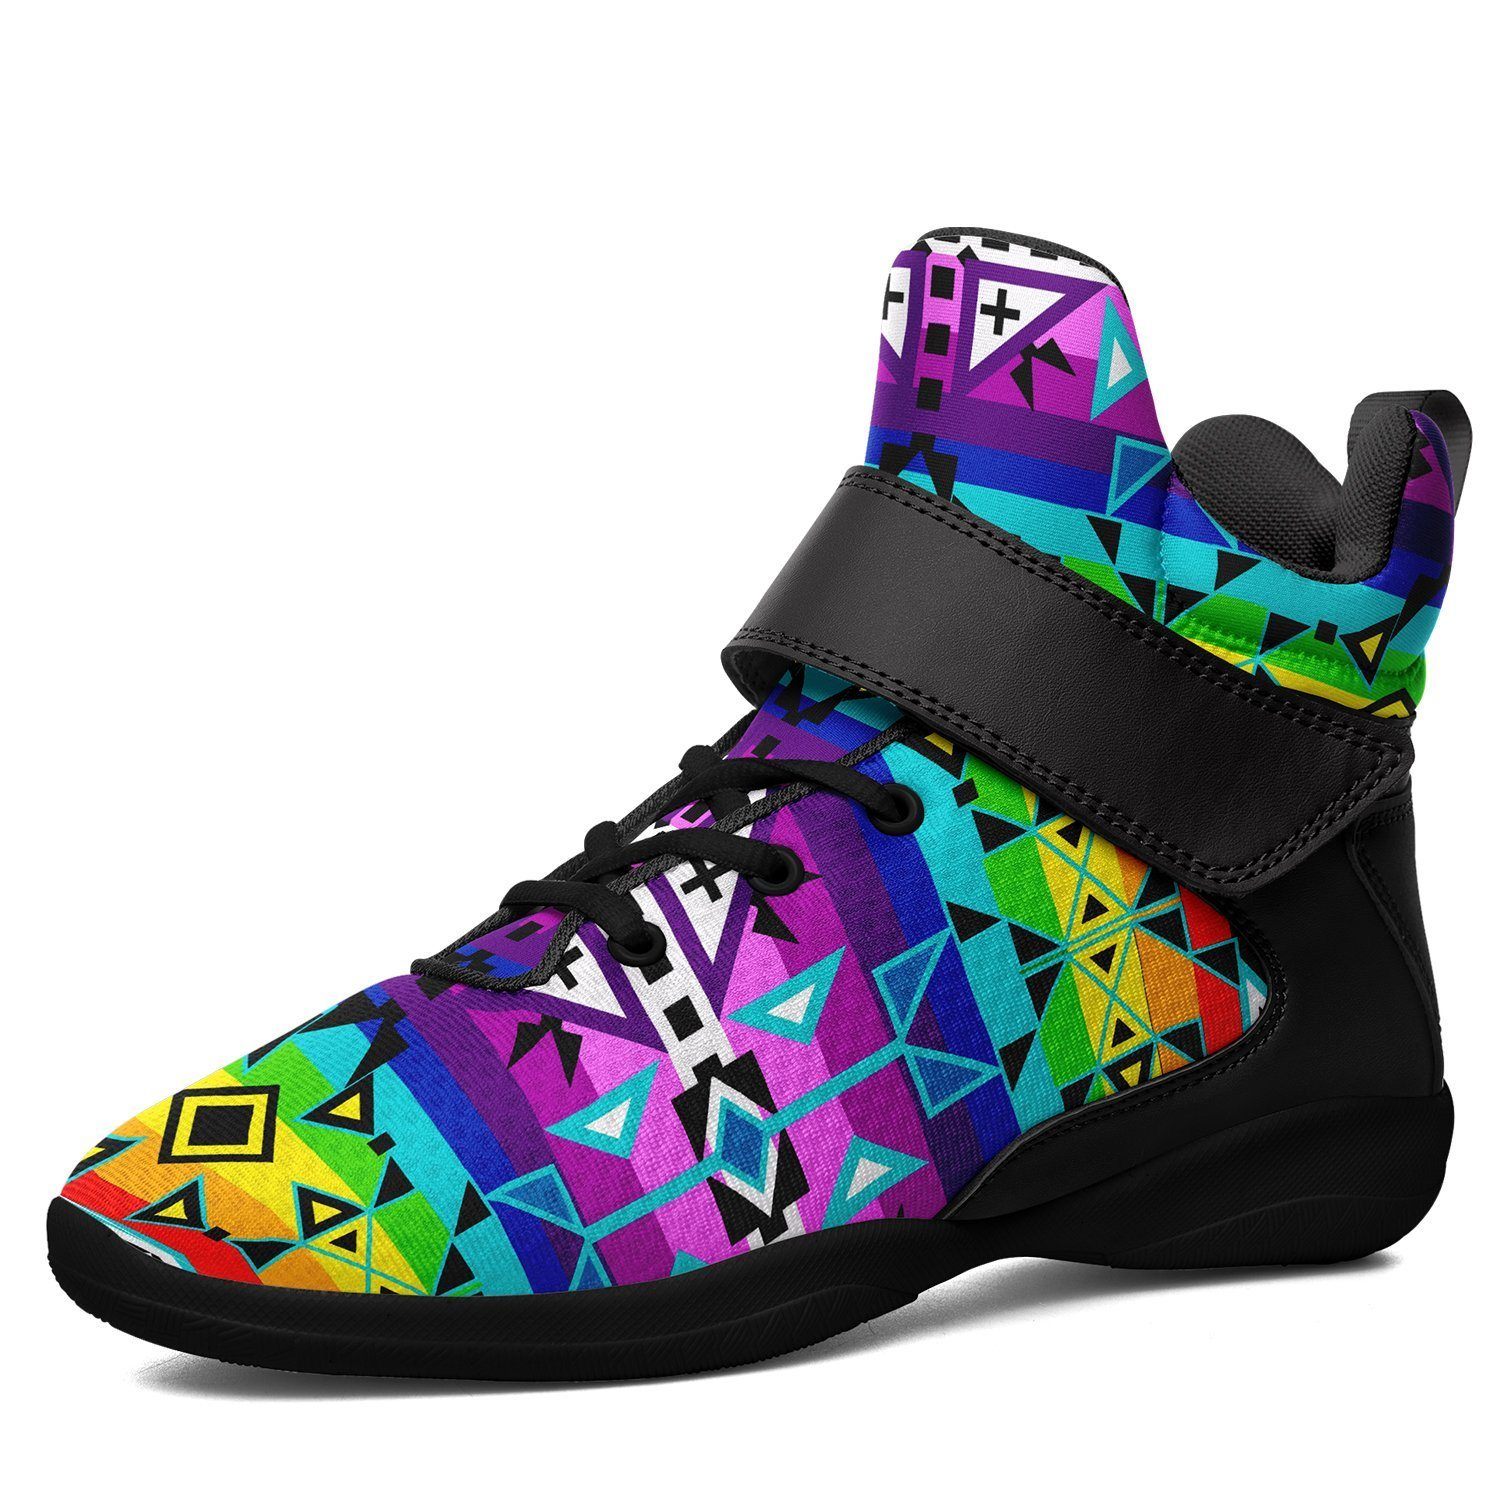 After the Rain Ipottaa Basketball / Sport High Top Shoes - Black Sole 49 Dzine US Women 8.5 / US Men 7 / EUR 40 Black Sole with Black Strap 